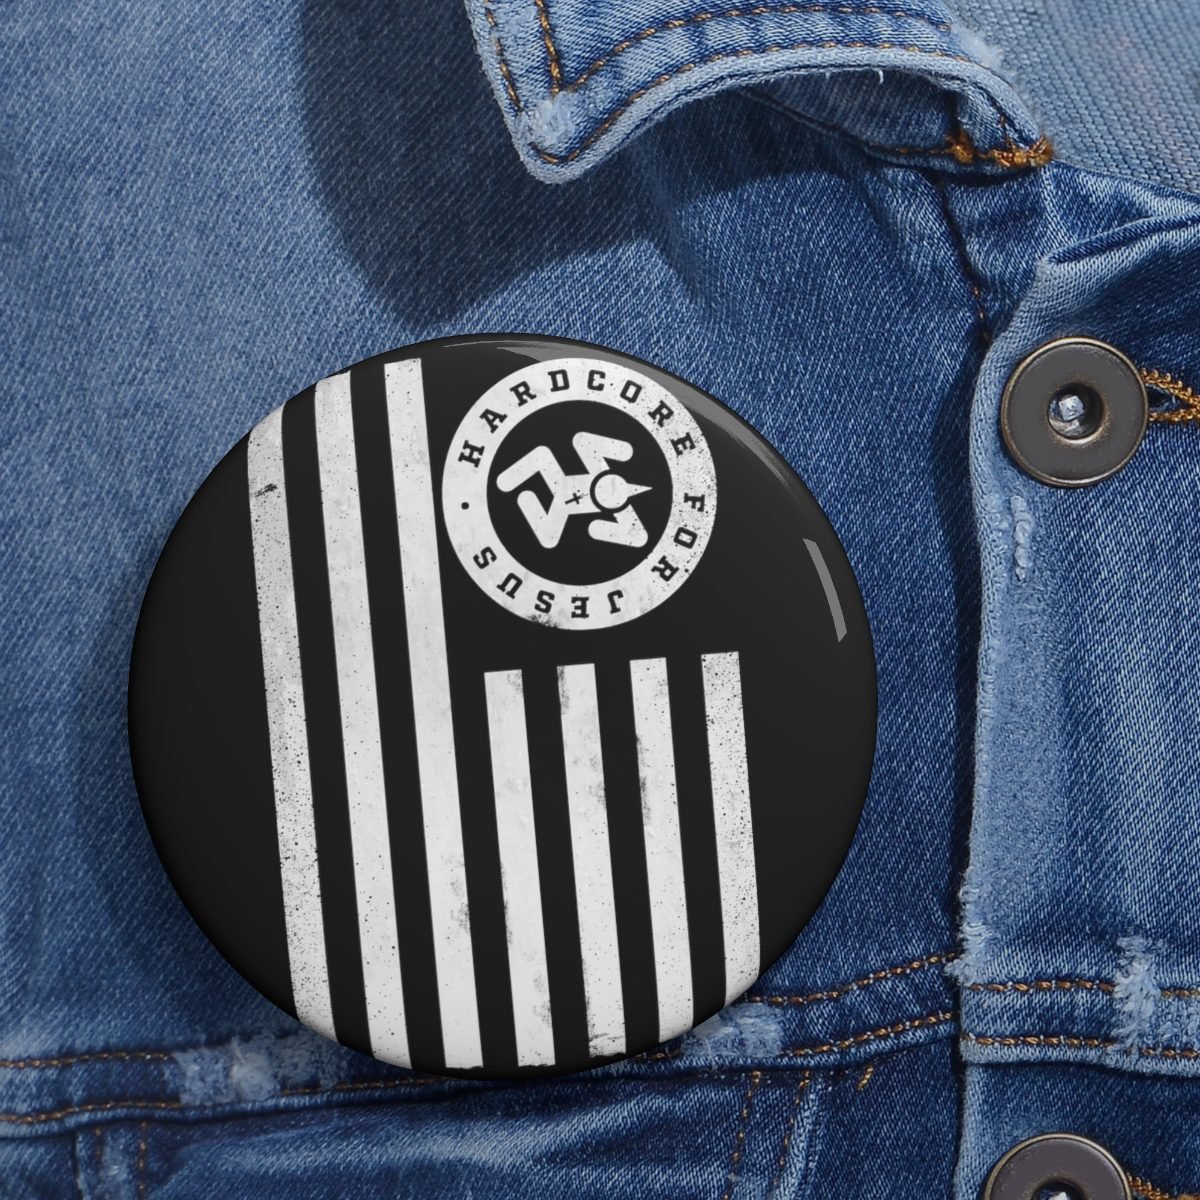 Hardcore for Jesus Flag Pin Buttons